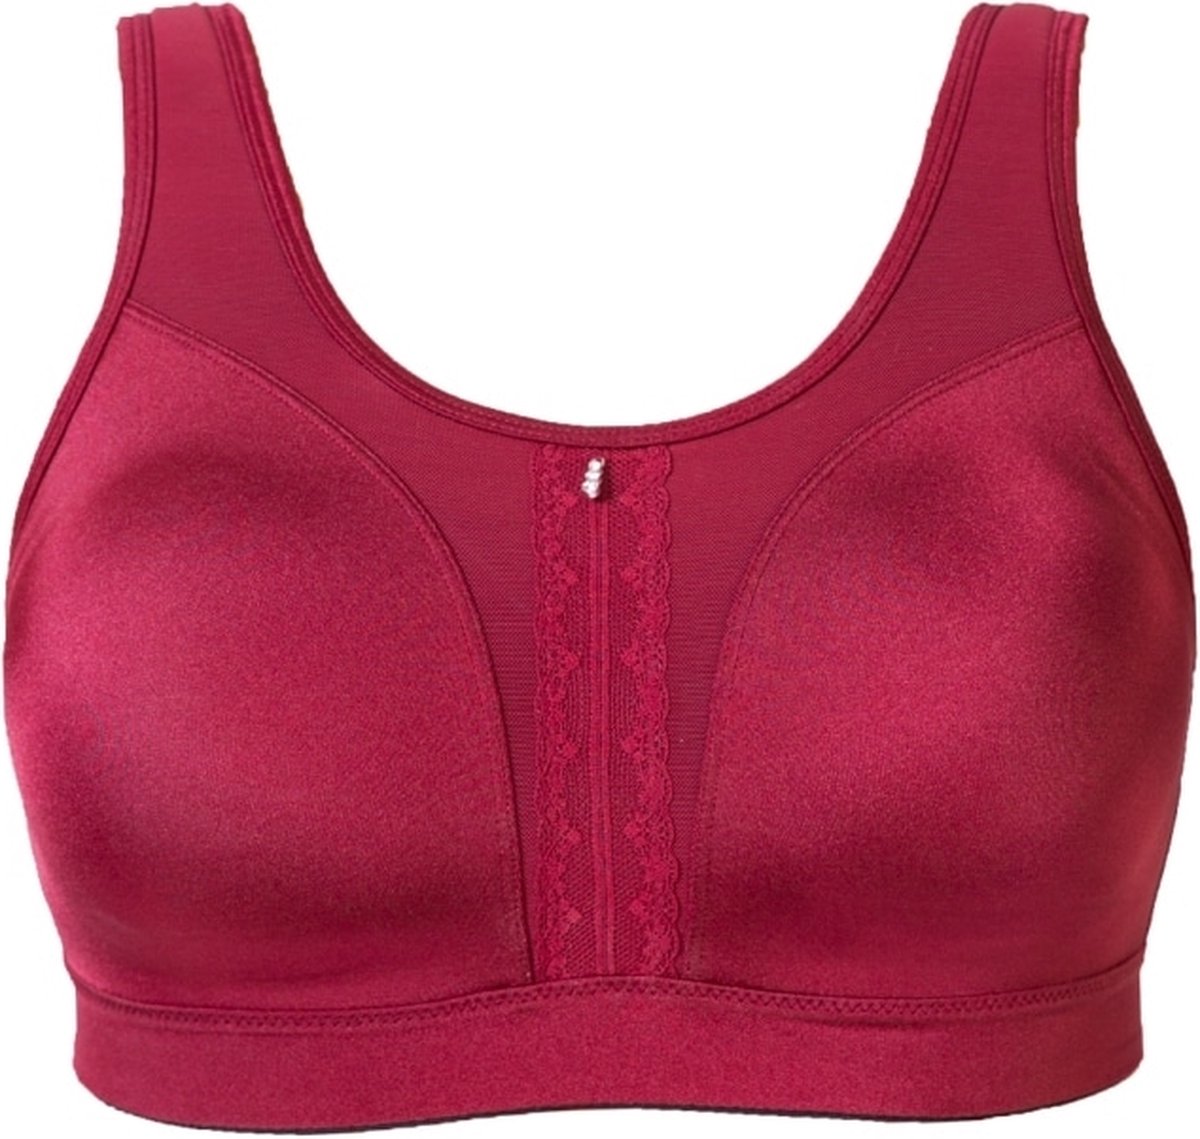 High impact Sport BH (zonder beugel) Cannes, Deep Red / Bordeaux rood, maat: 100I